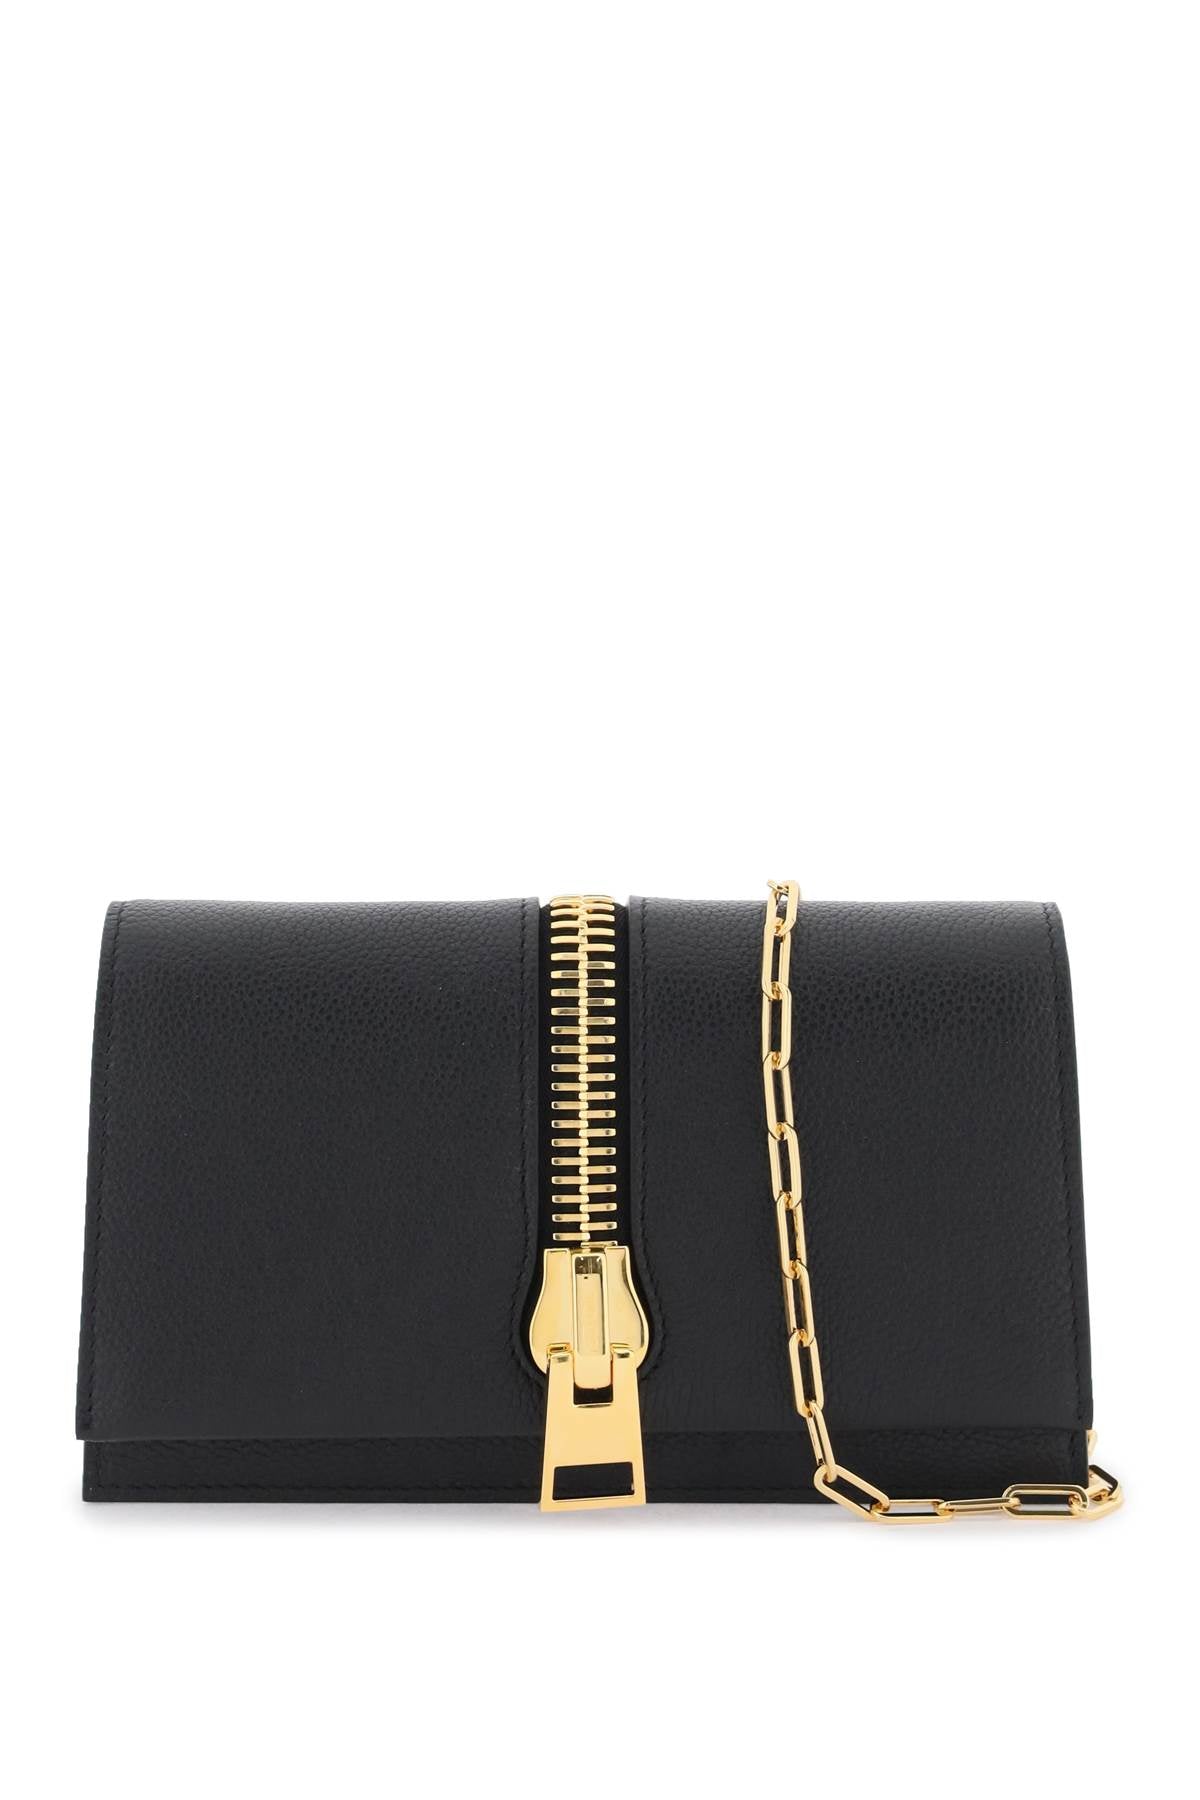 TOM FORD Black Grained Leather Mini Clutch with Gold-Tone Chain Strap